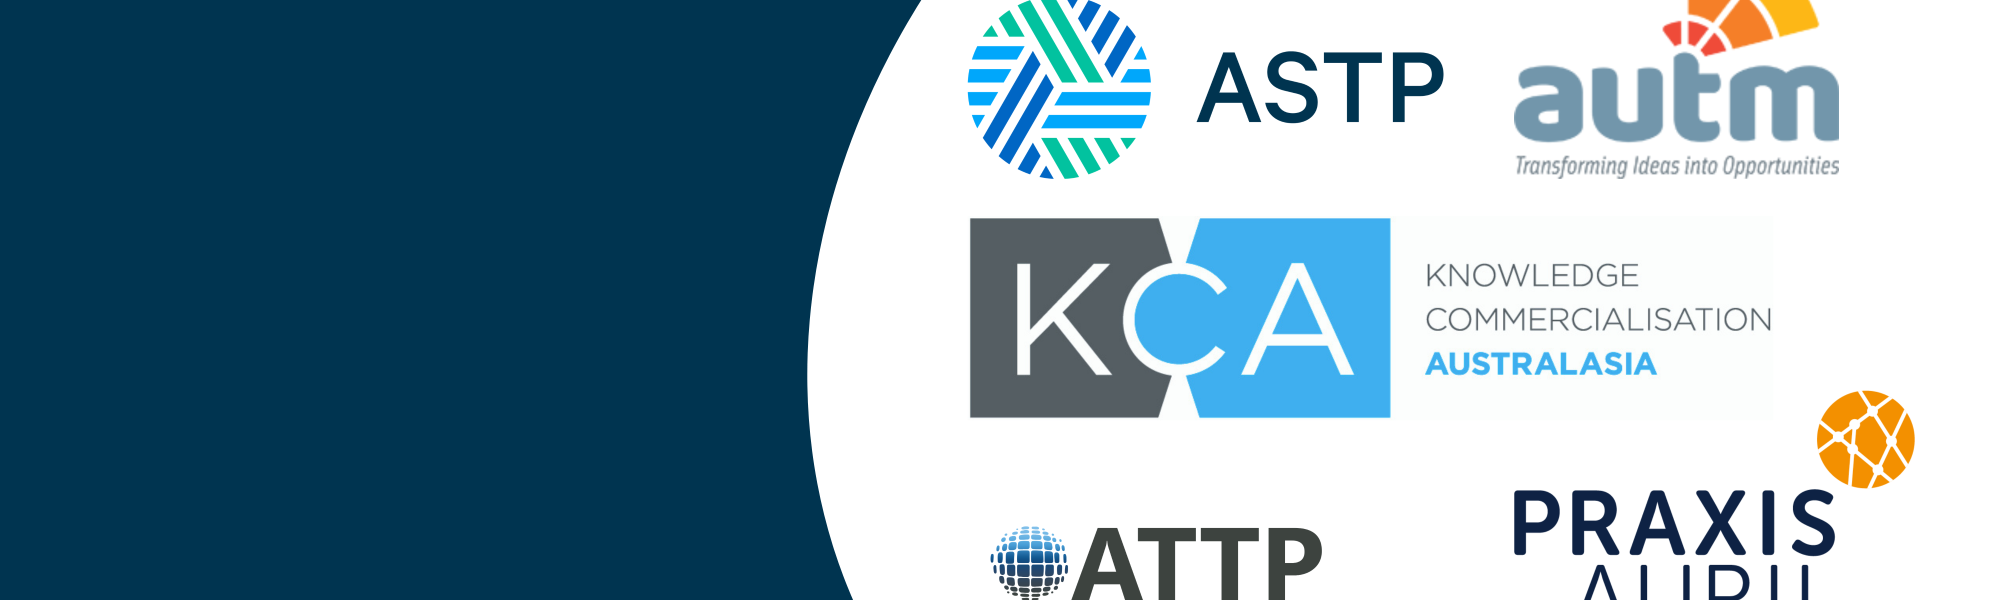 ASTP - Knowledge and Technology Transfer Defining the Profession